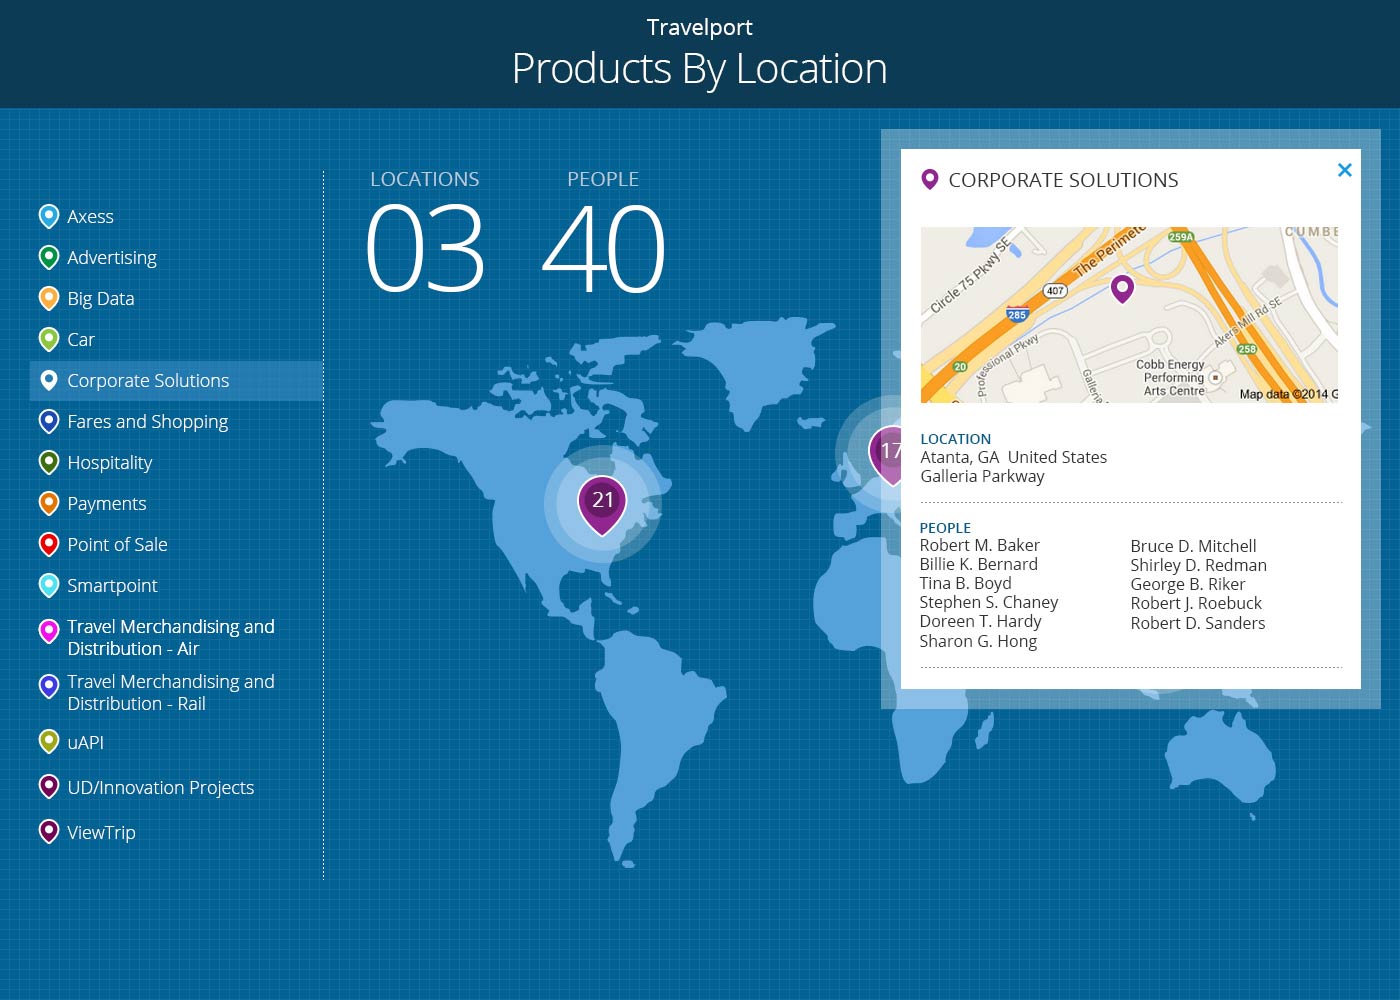 Products By Location Product Details